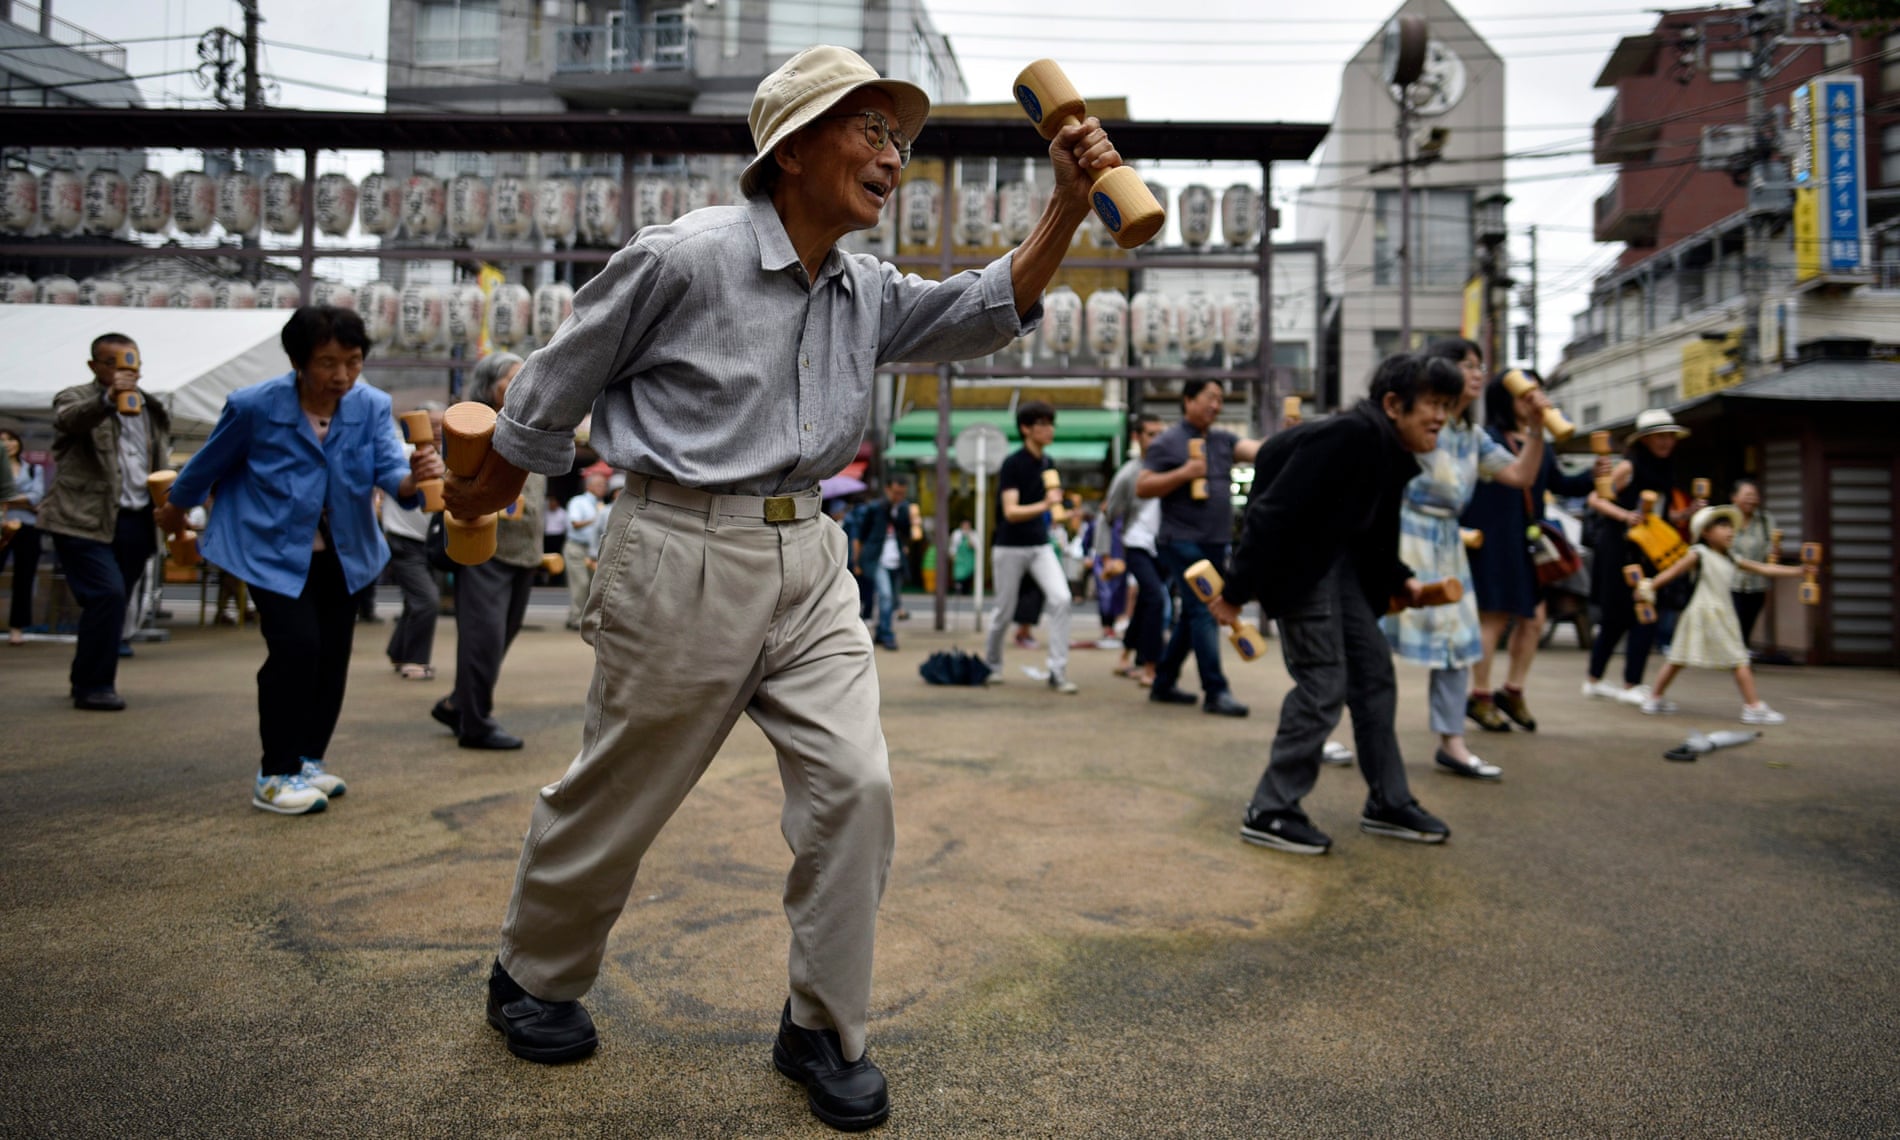 Respect for the Aged Day in Tokyo. According to UN figures, the number of over 60s worldwide is set to double by 2050, rising to 2.1bn.